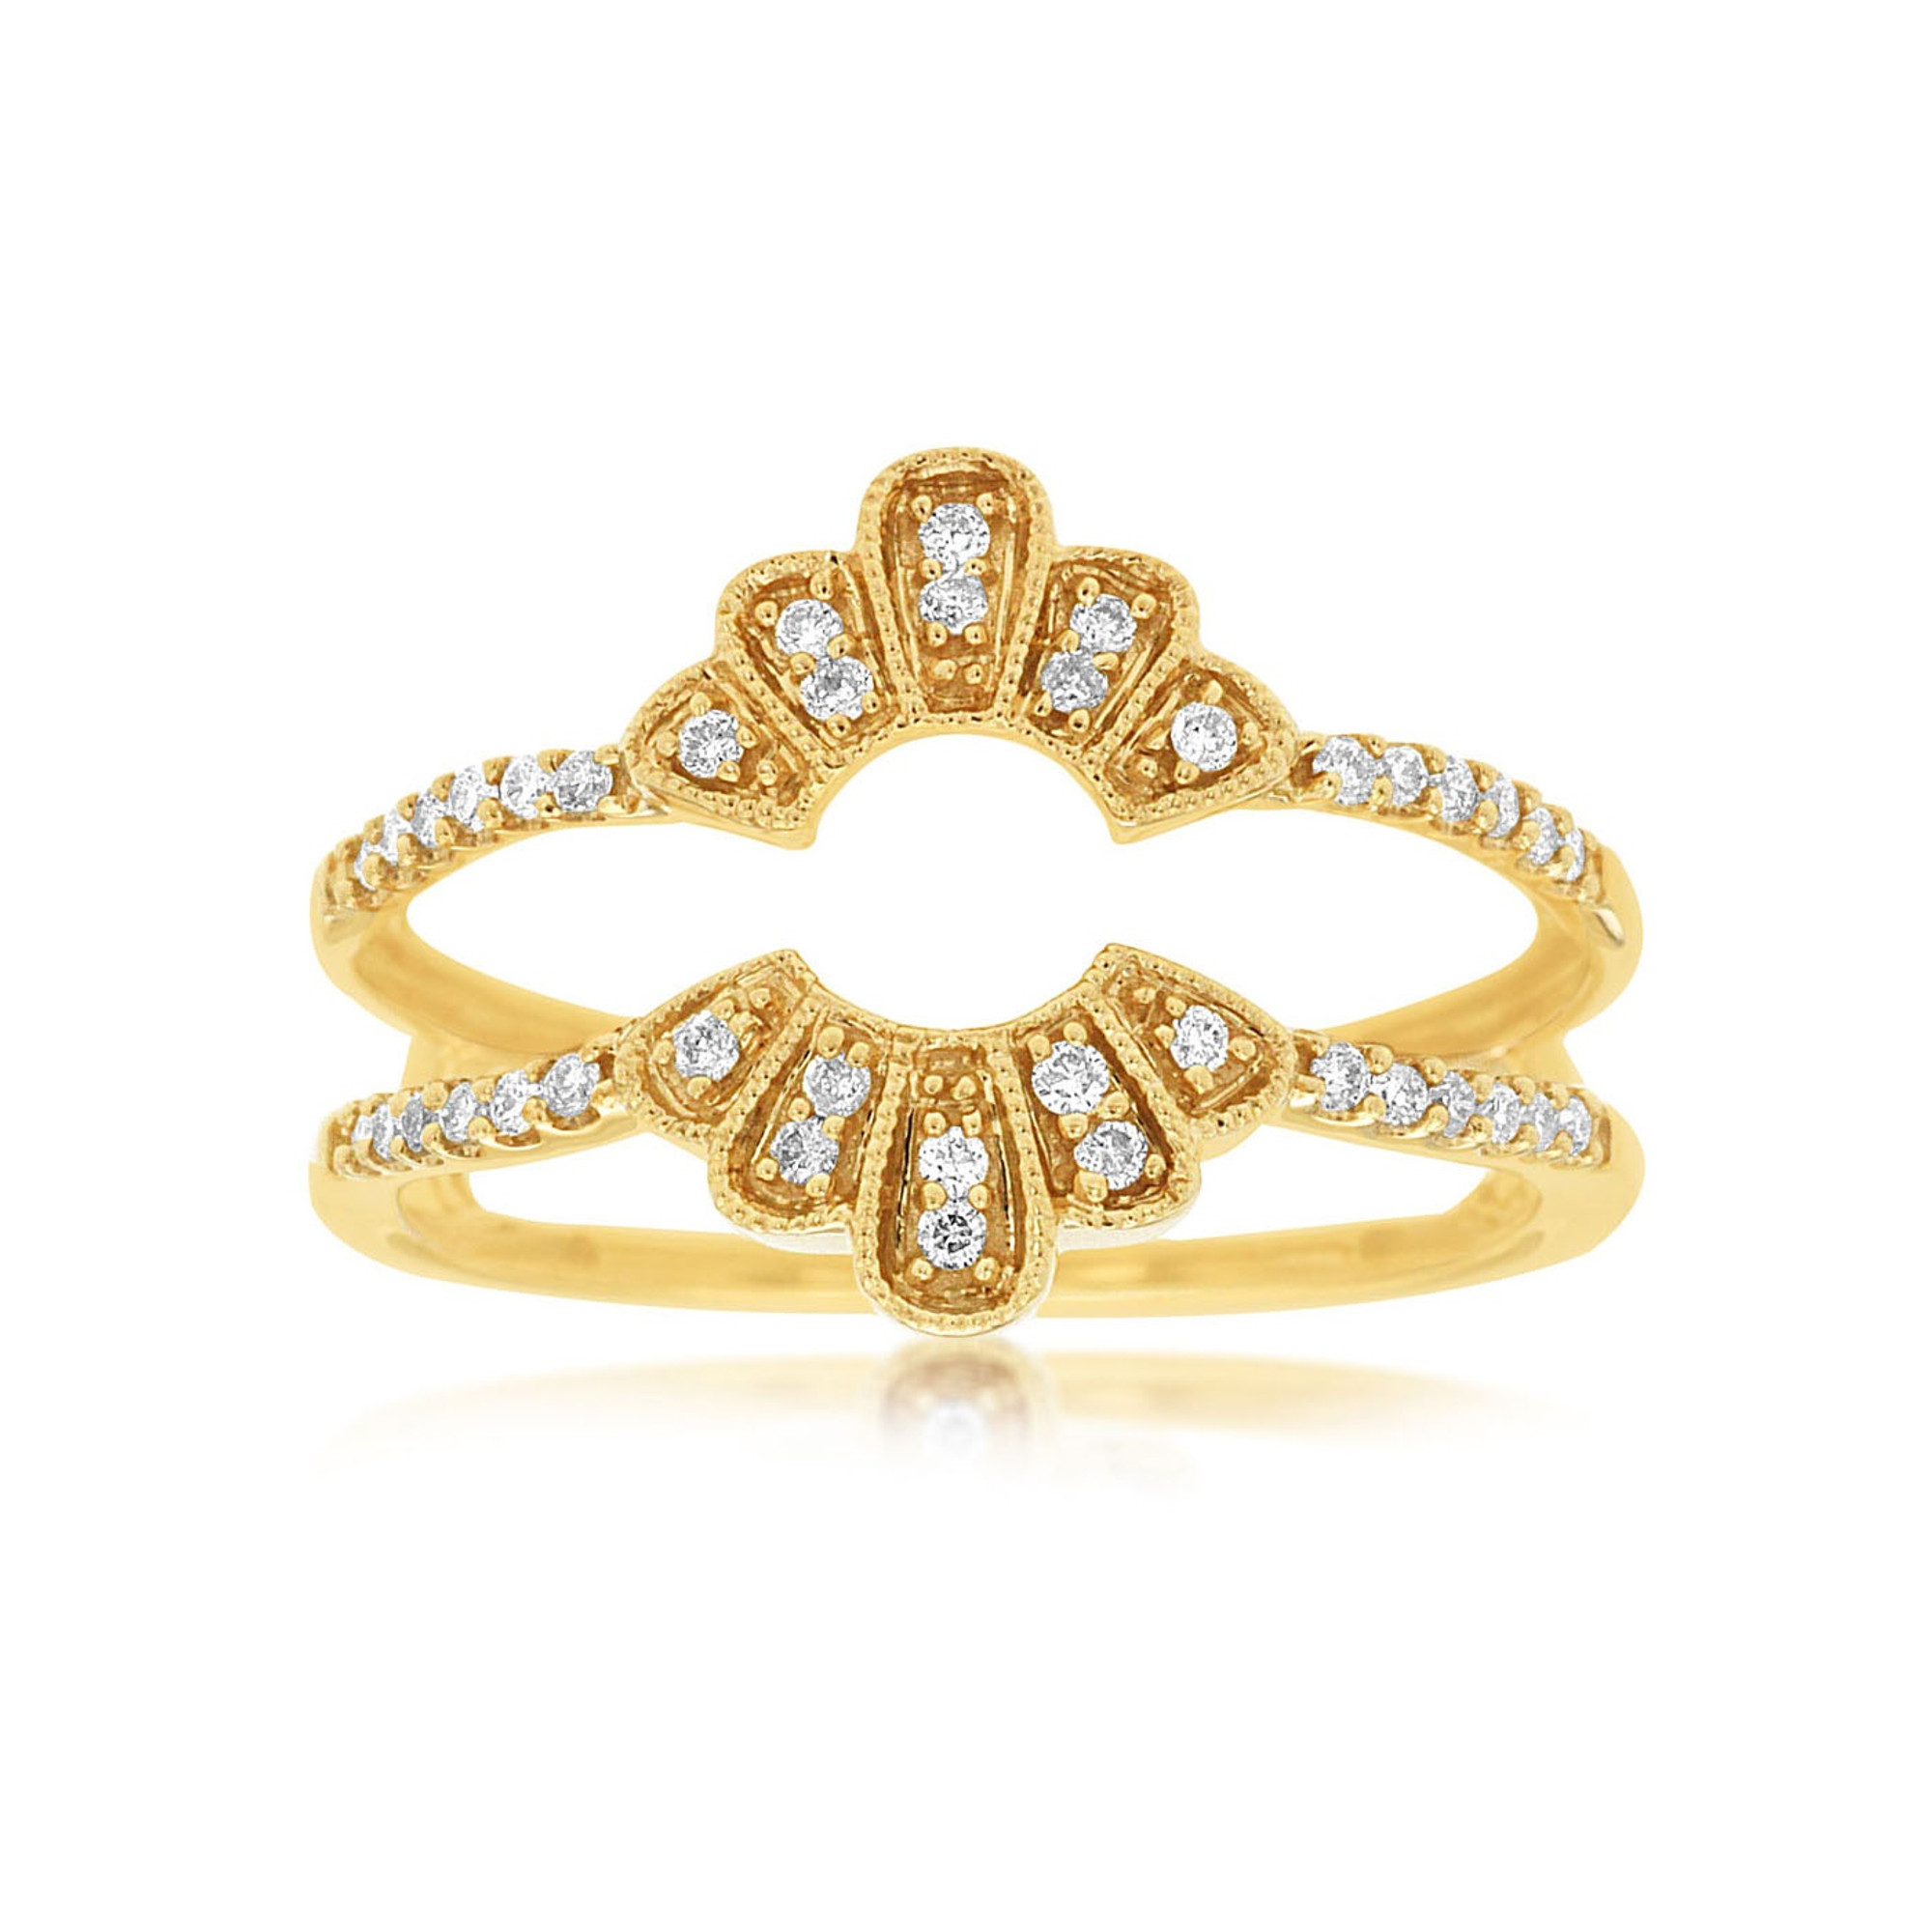 Buy CANDERE - A KALYAN JEWELLERS COMPANY Diamondlites Collection 14K (585)  BIS Hallmark Yellow Gold Ring For Women at Amazon.in